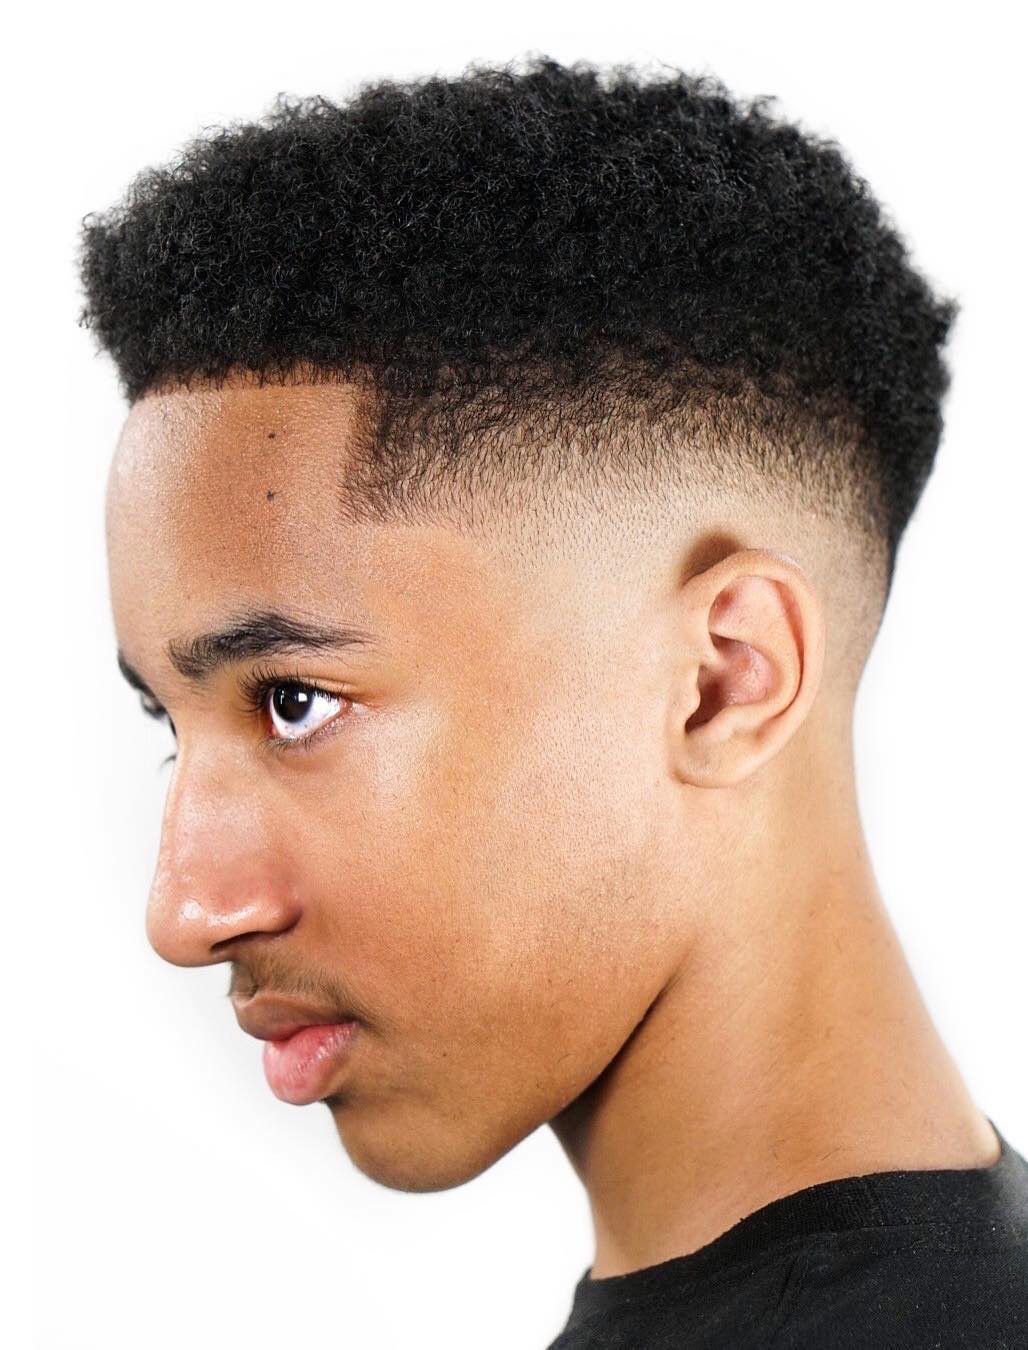 20 Eye Catching Haircuts For Black Boys So fade haircuts are hugely popular in black people. 20 eye catching haircuts for black boys